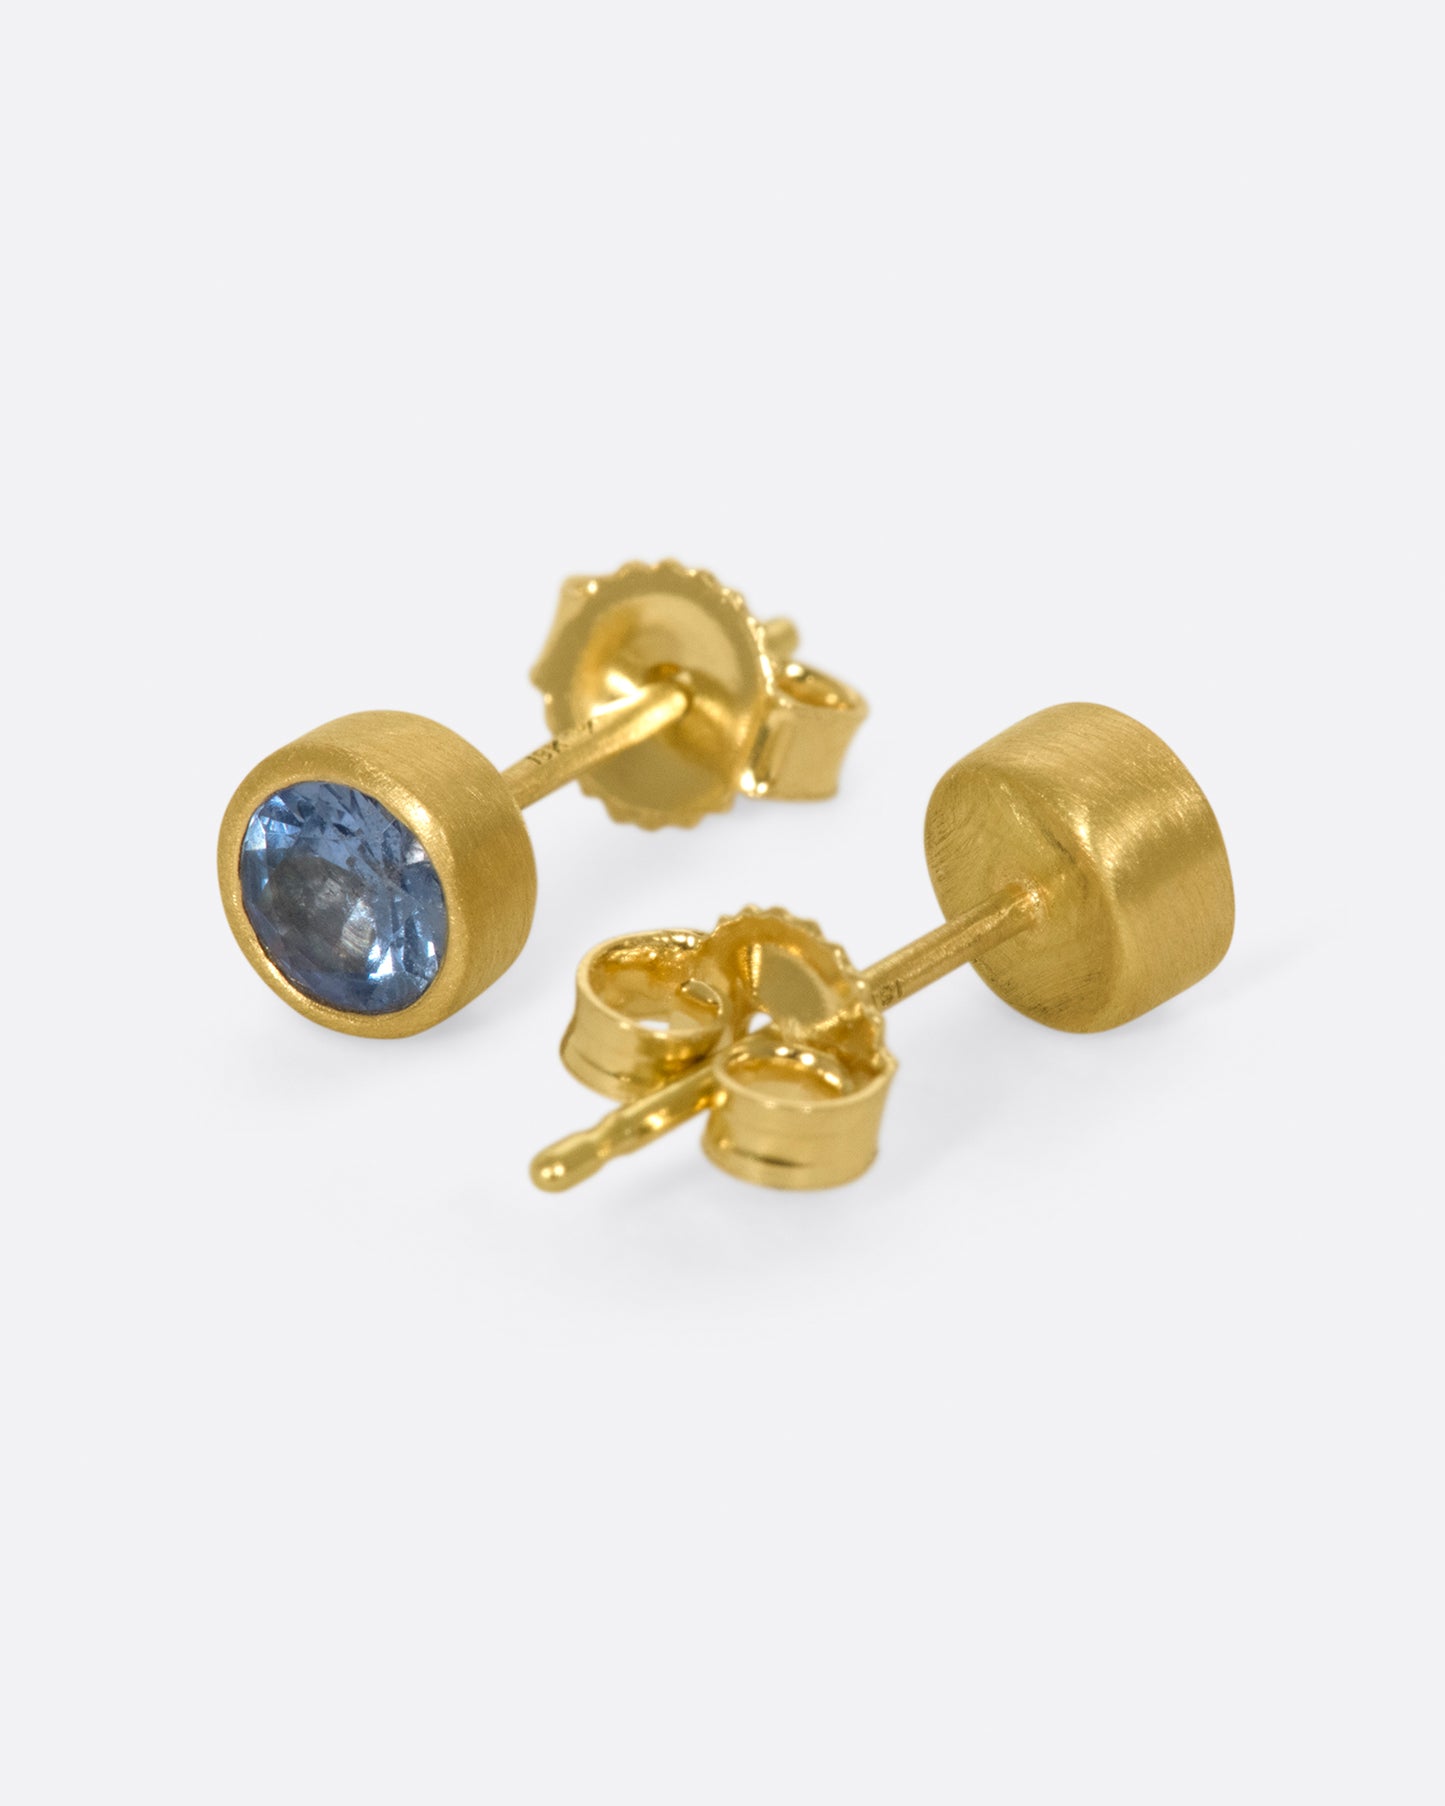 A pair of solitaire earrings featuring medium-blue sapphires in matte gold bezels.